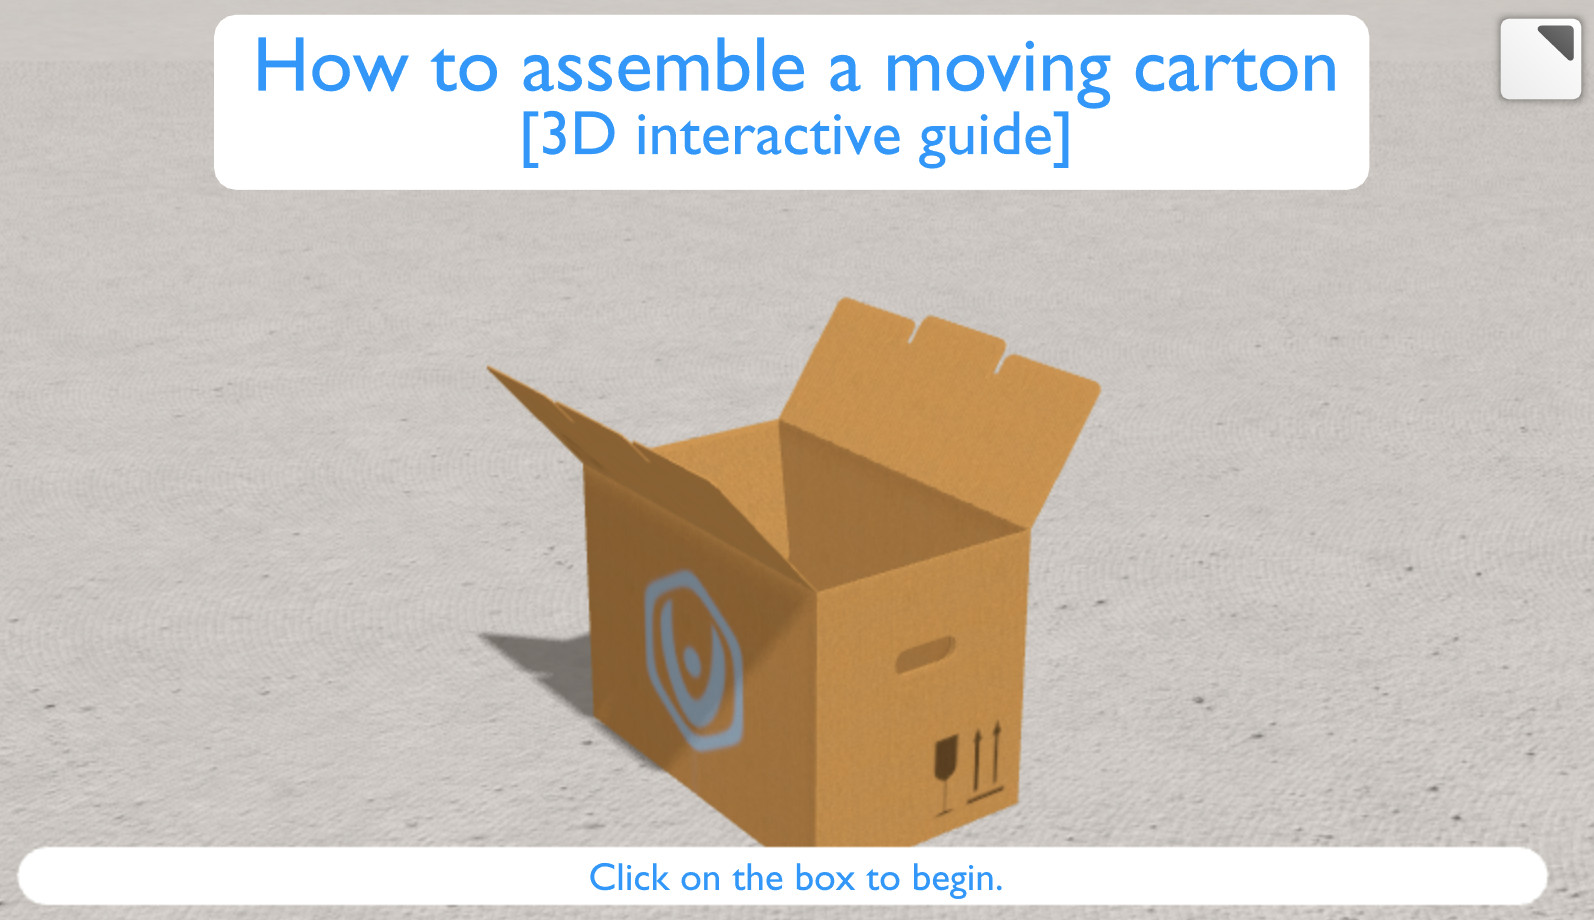 Elearning demo showcases 3D user interfaces